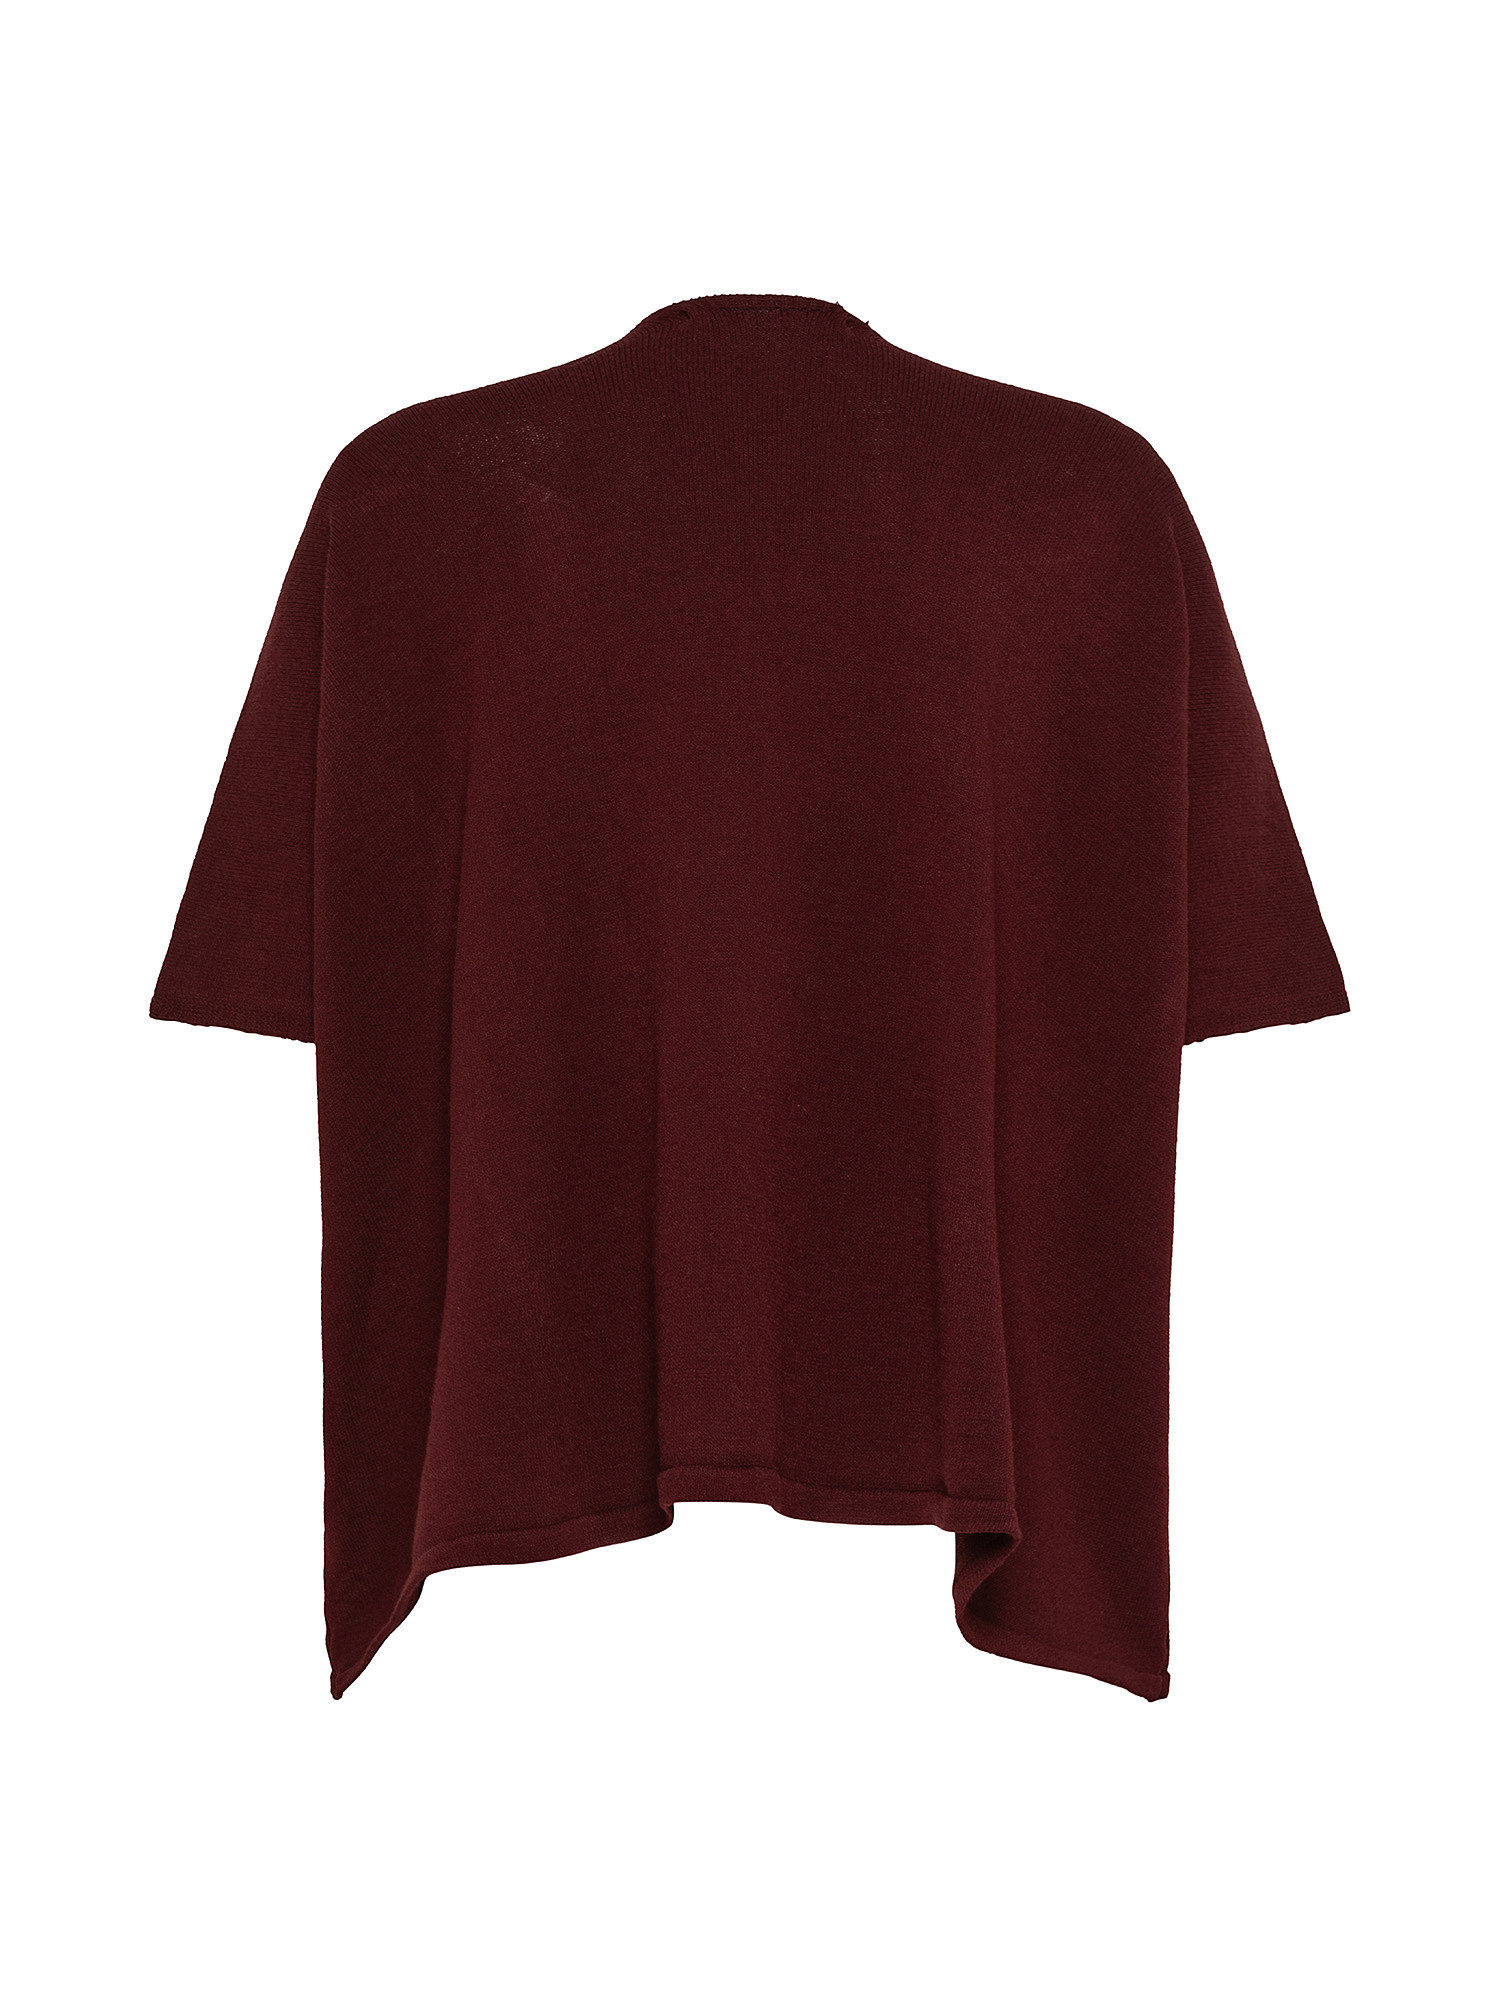 Cardigan, Rosso bordeaux, large image number 1